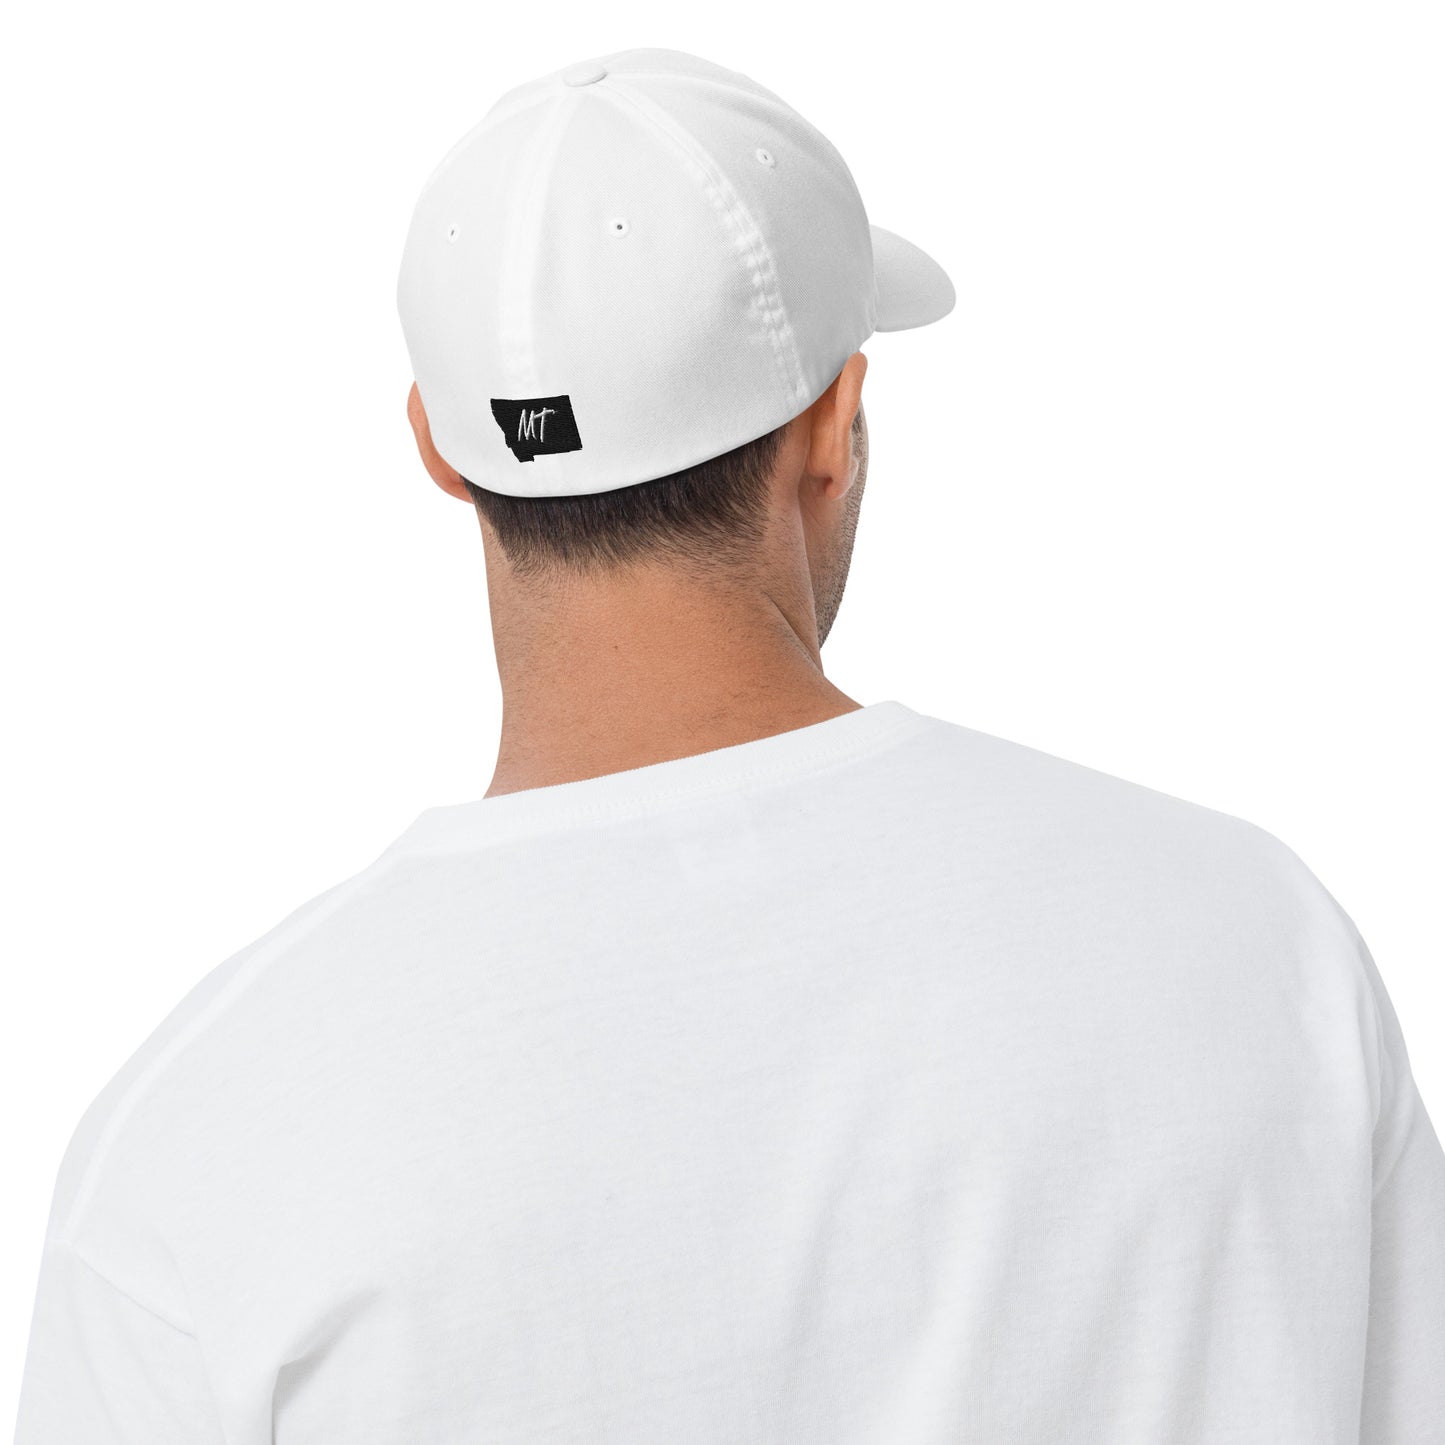 Back-Side view of Gallatin Mountain Range in Gallatin National Forest Montana White Men's Flexfit Cap from Park Attire